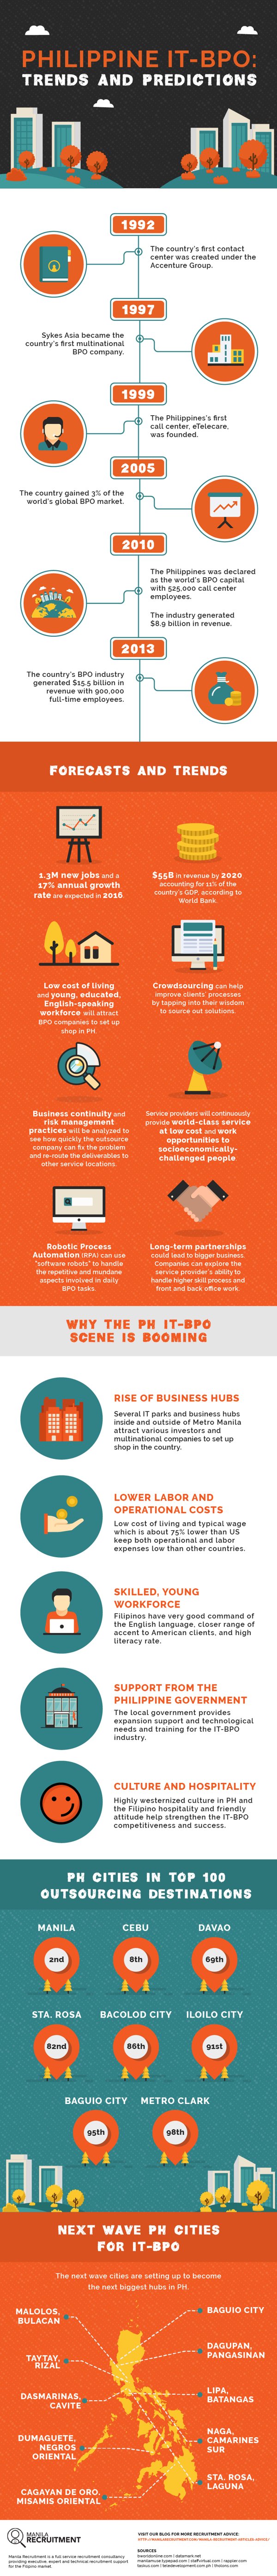 the-philippine-it-bpo-trends-and-forecasts